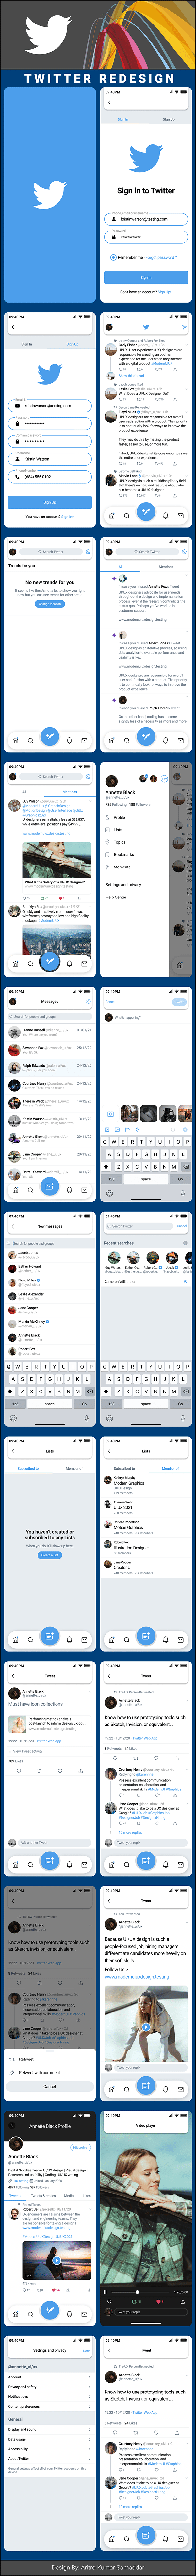 TWITTER MOBILE APPLICATION REDESIGN